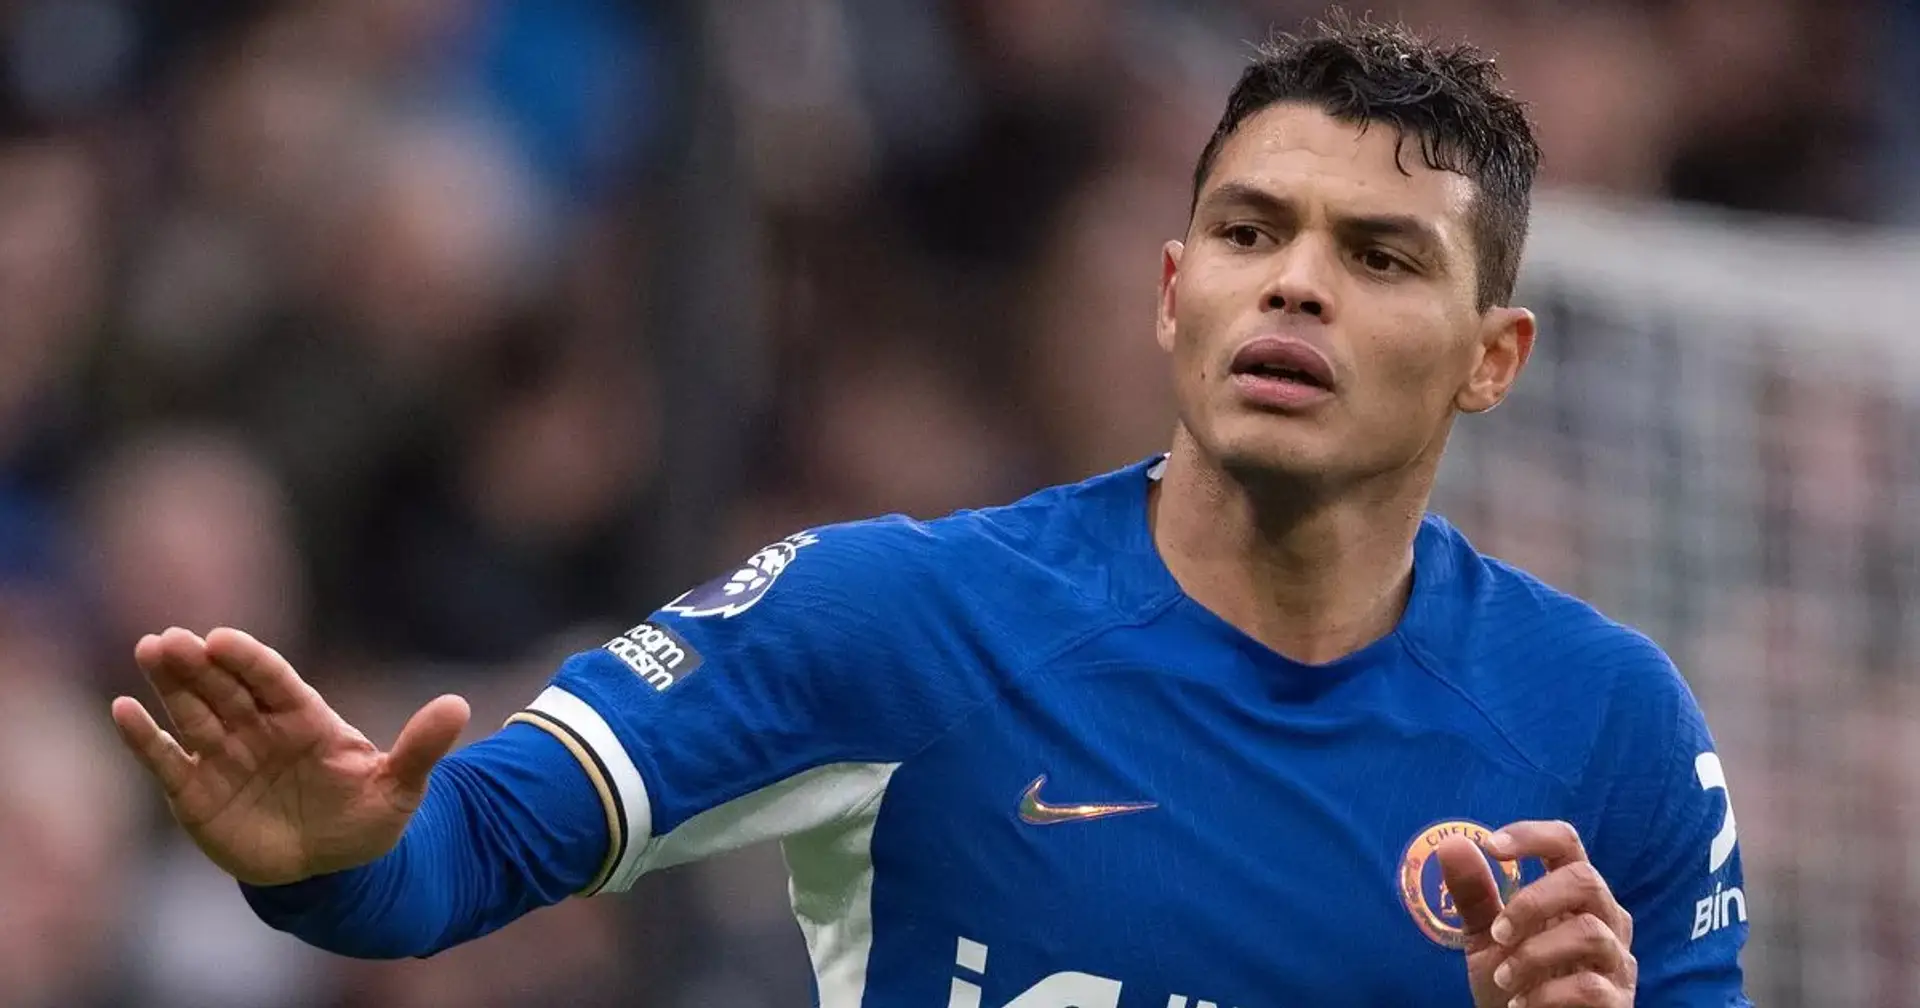 Thiago Silva reacts to Leicester win after being unused sub for Chelsea